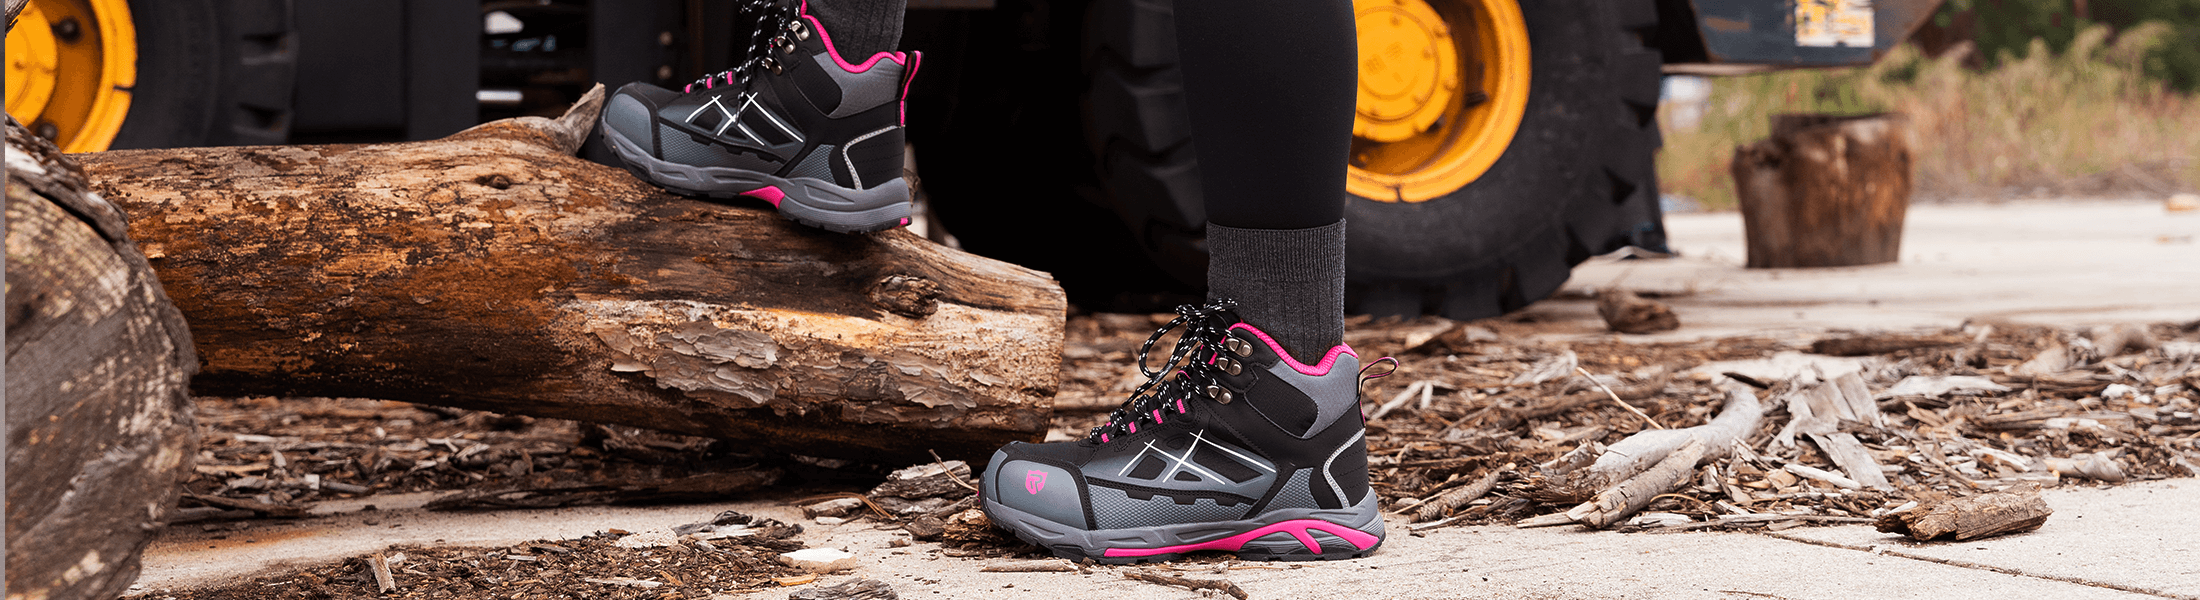 Women's Puncture Resistant Work Boots